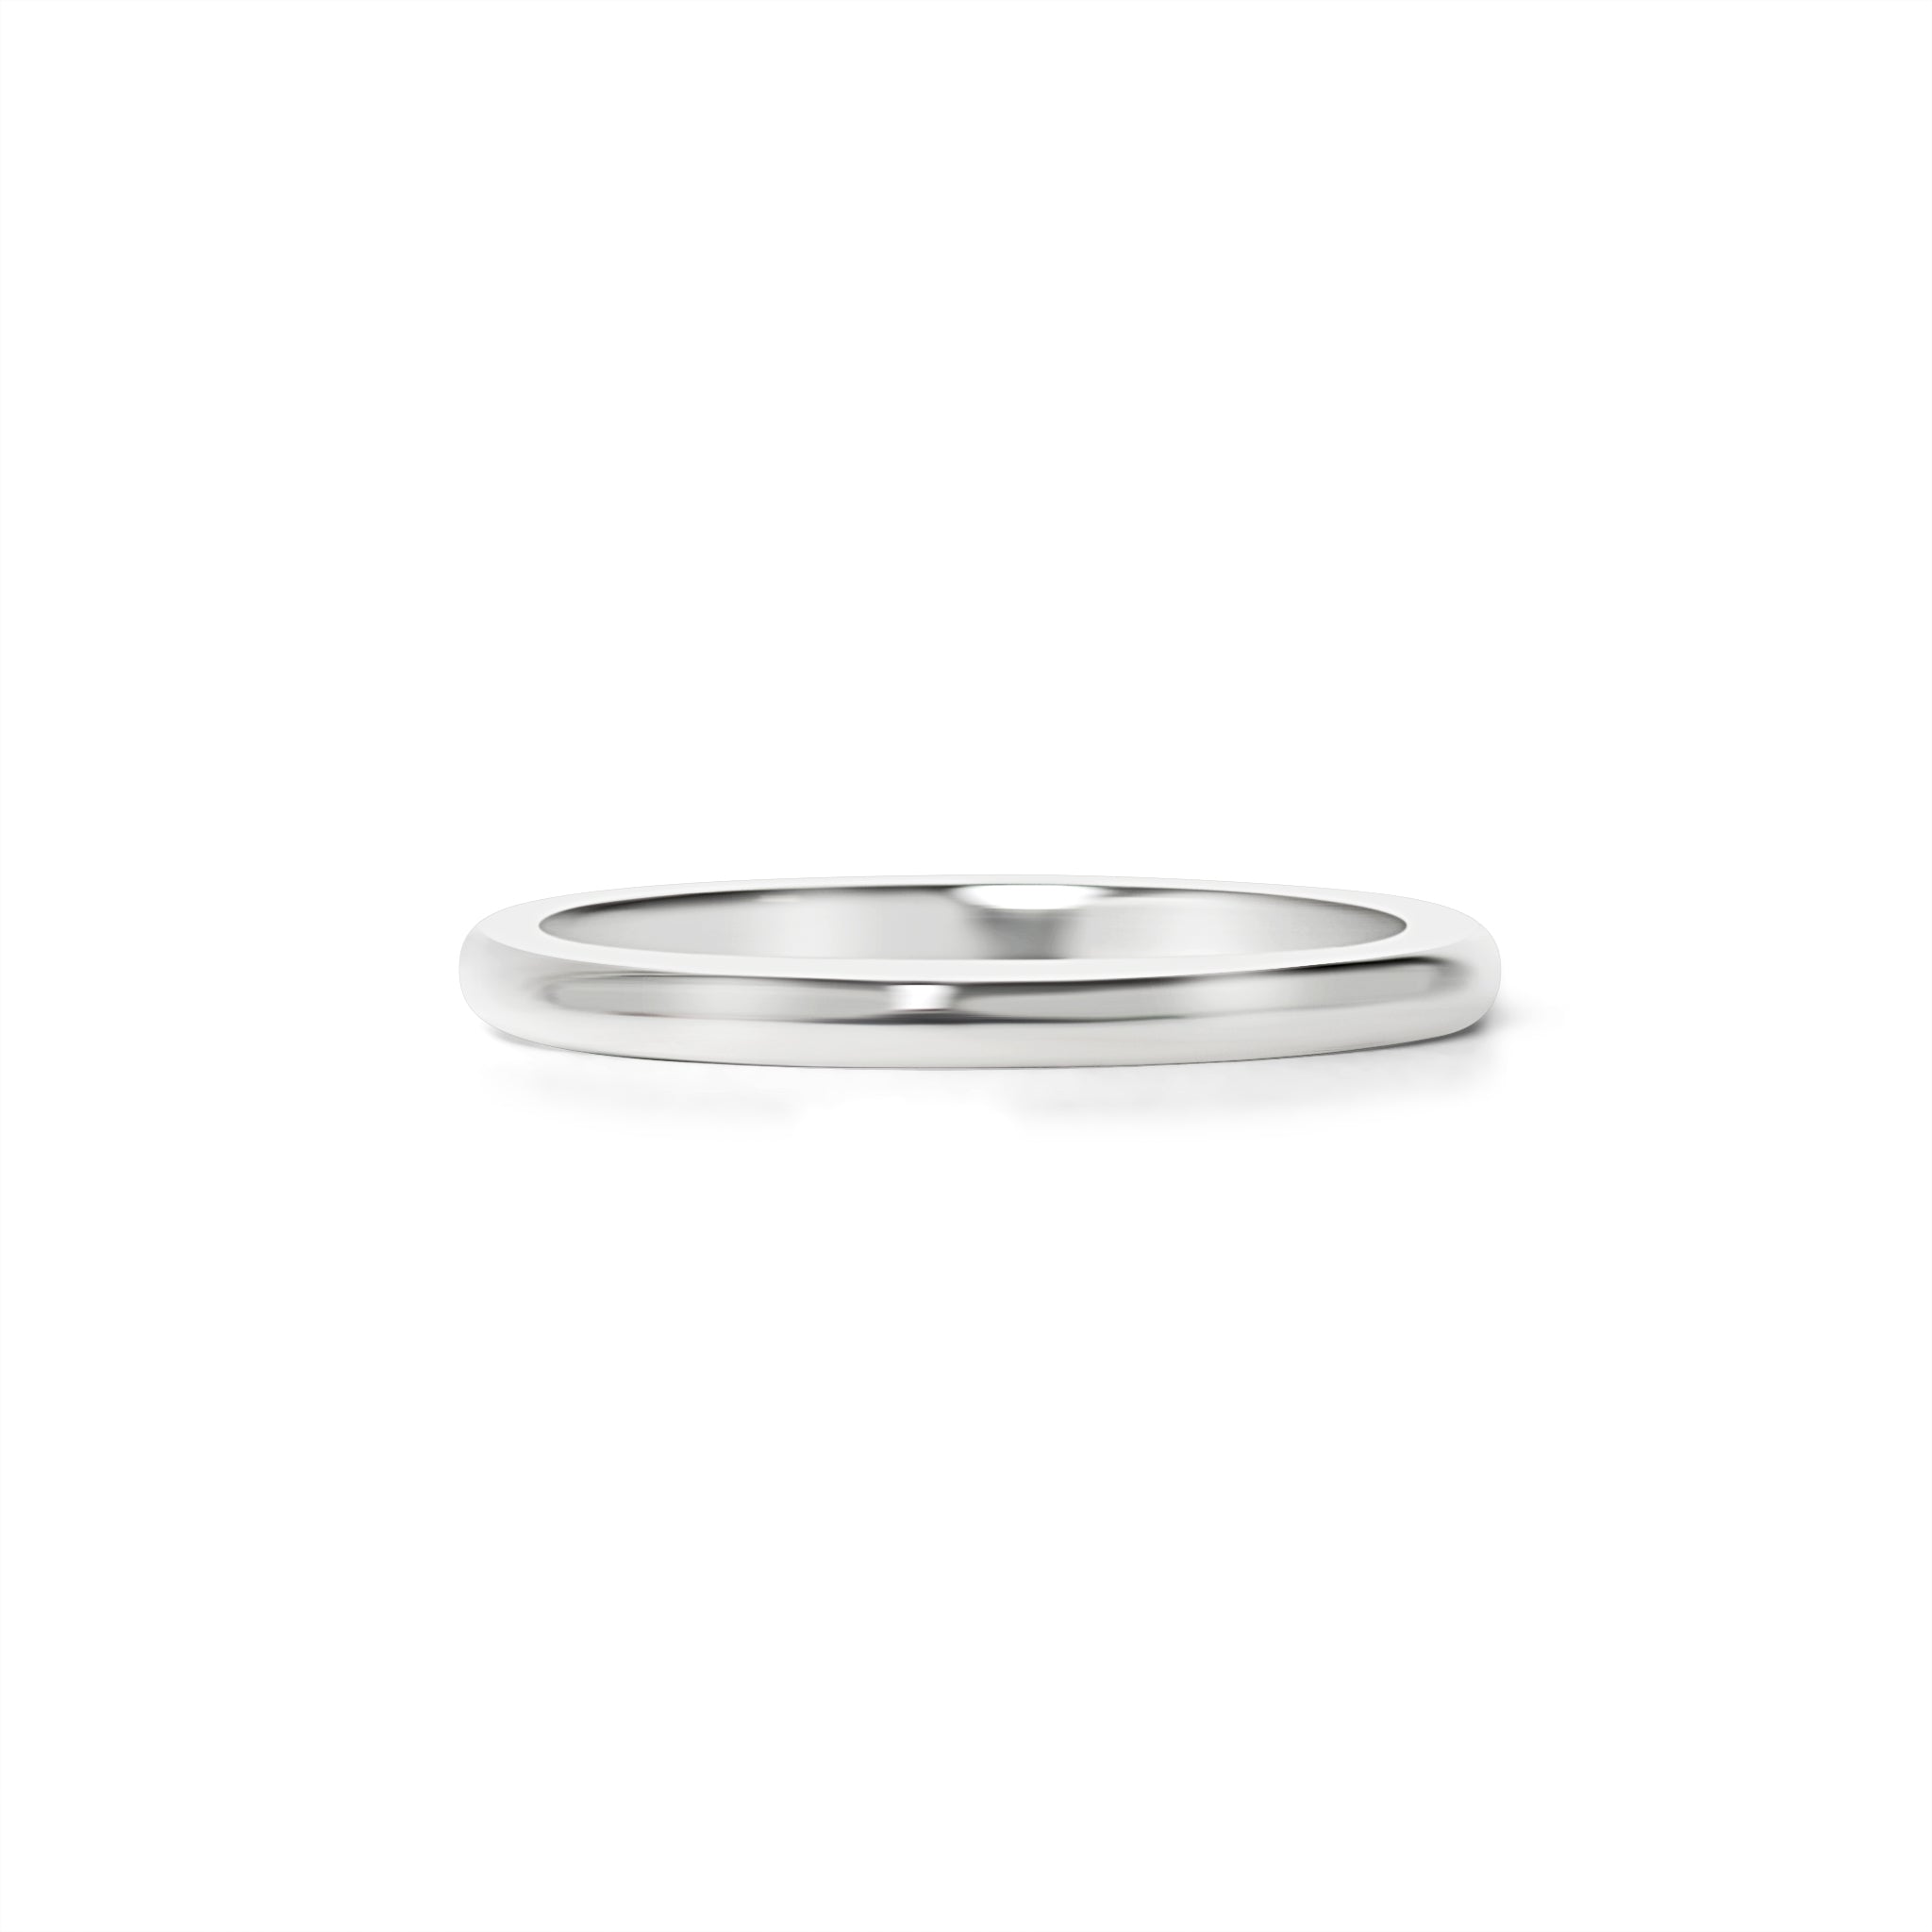 Highly Polished Stainless Steel Blank Ring - Versatile Classic Style, 7mm-11mm Widths, Durable 316L Surgical Steel - Jewelry & Watches - Bijou Her -  -  - 